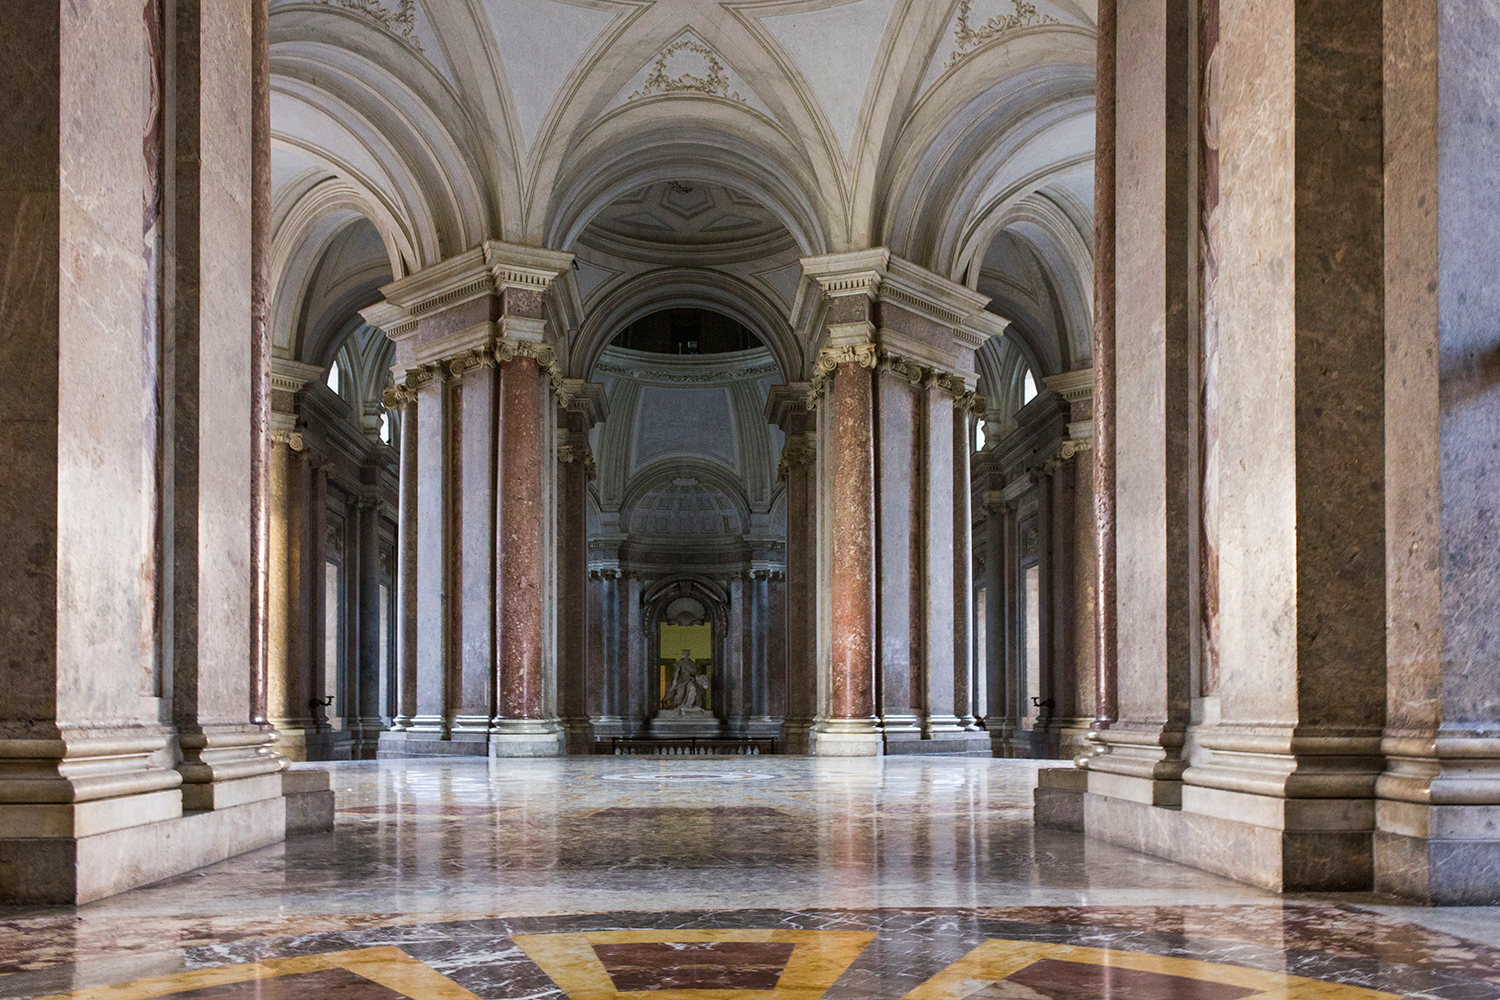 Palace of Caserta in Italy